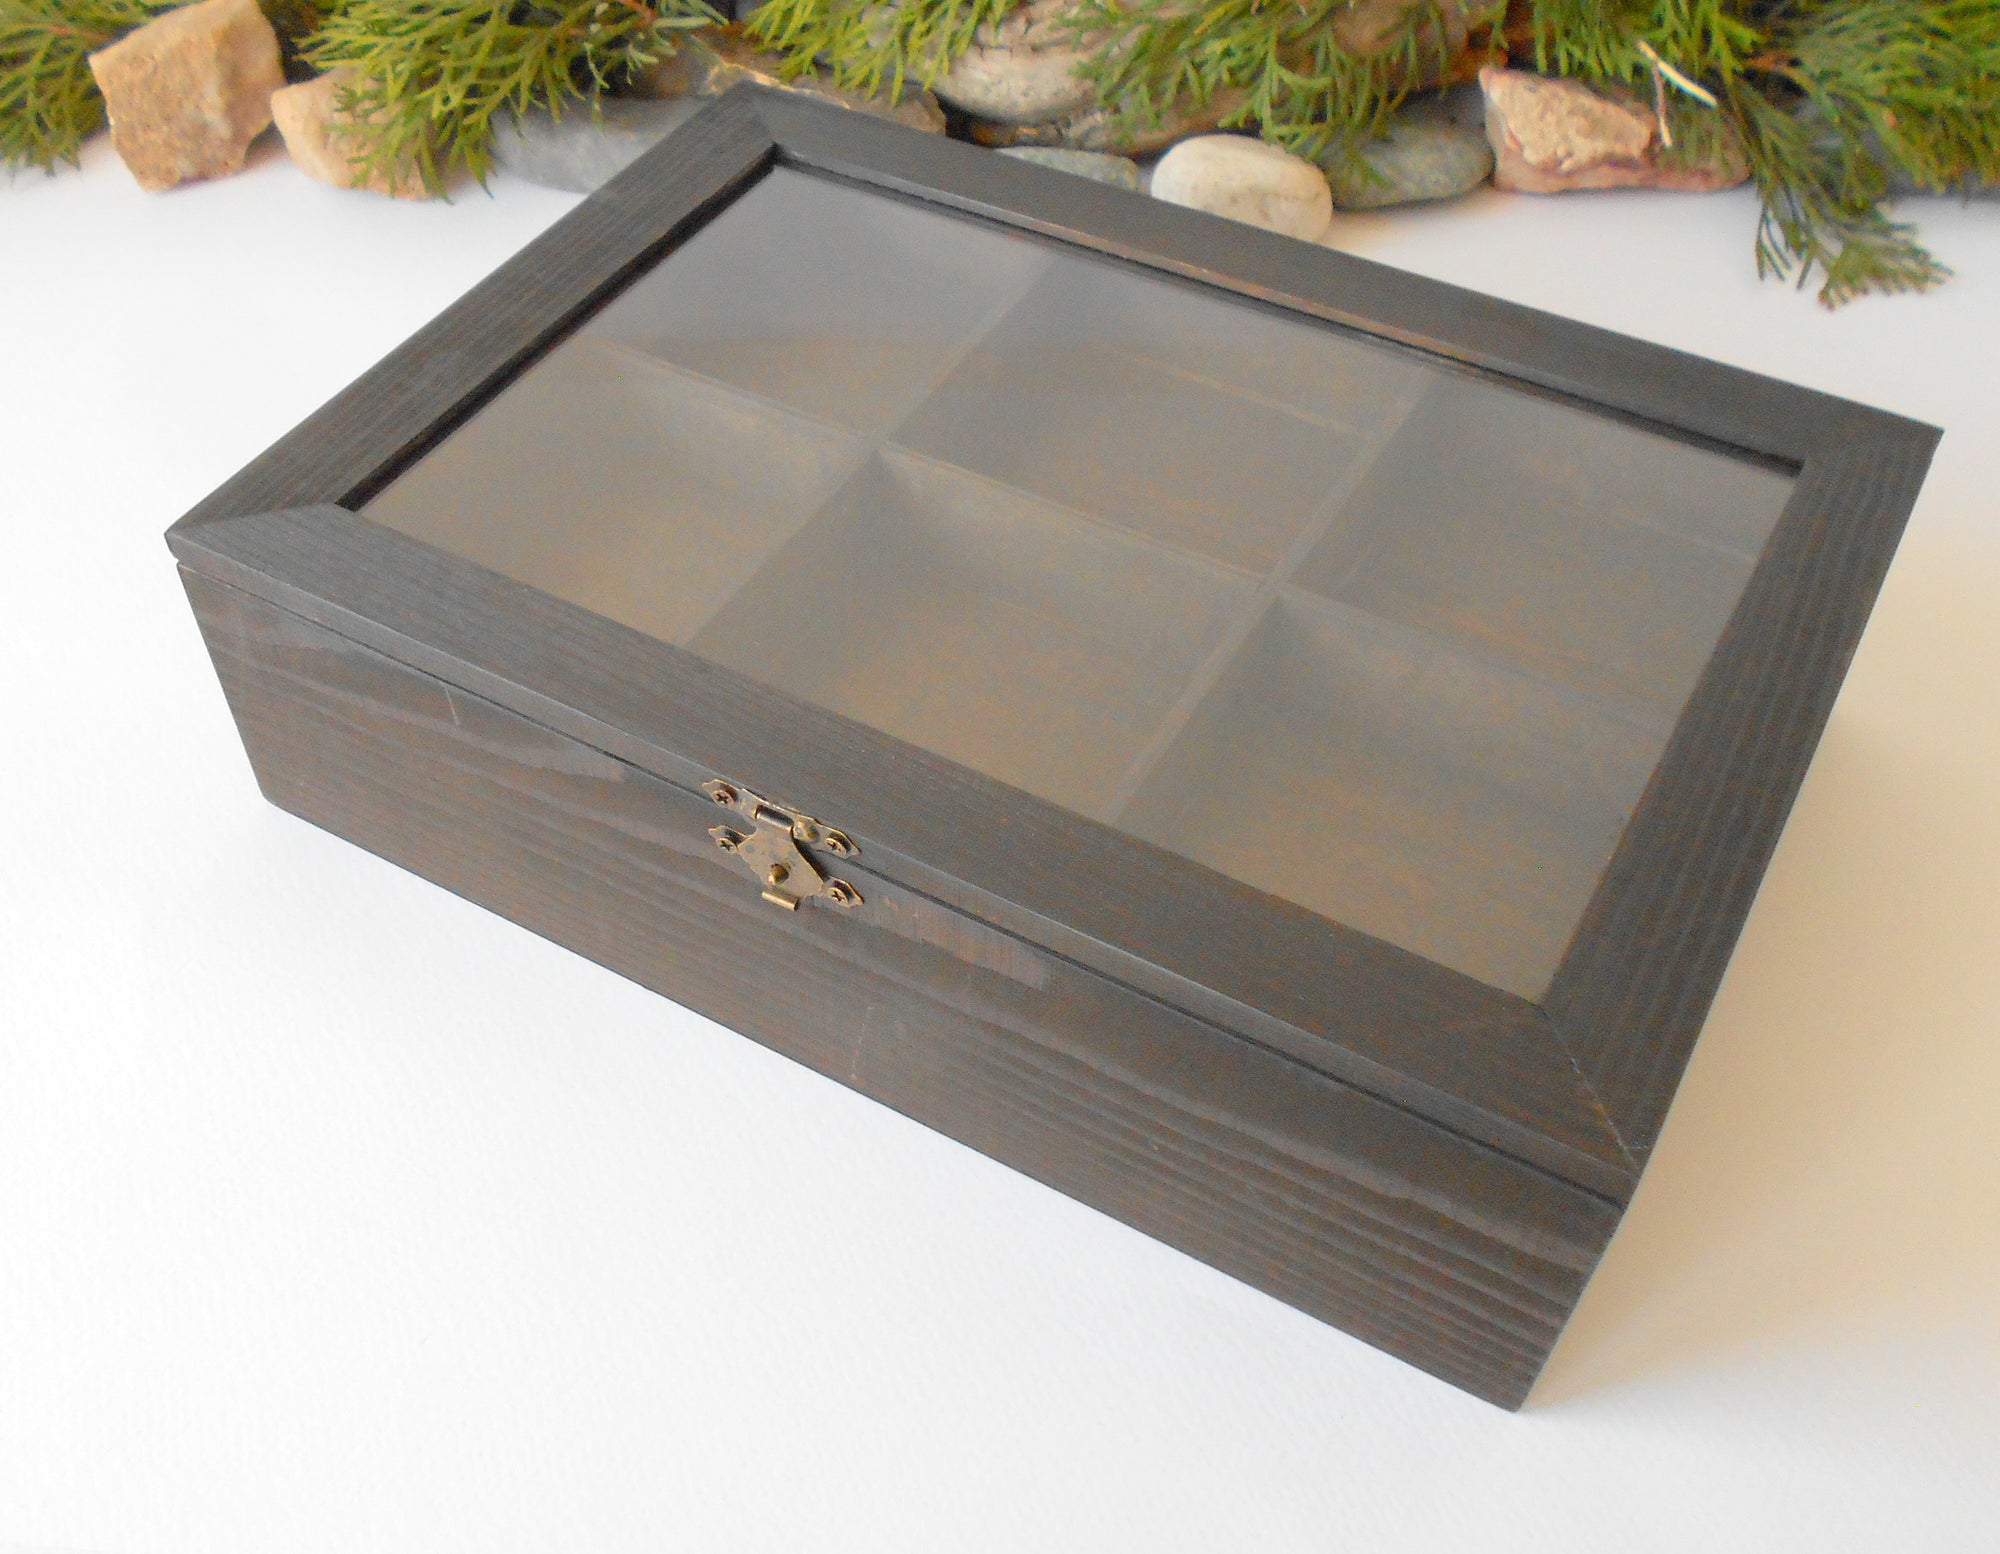 This is a wooden box with a glass display that is made of pinewood and that has metal hinges and closes with a bronze-color closing that may display various things like jewelry, miniatures, crystals, or other small objects of importance to you or your friends. <span>I have colored the box with mordant so that it looks like an old wood vintage box with a dark brown color.</span>